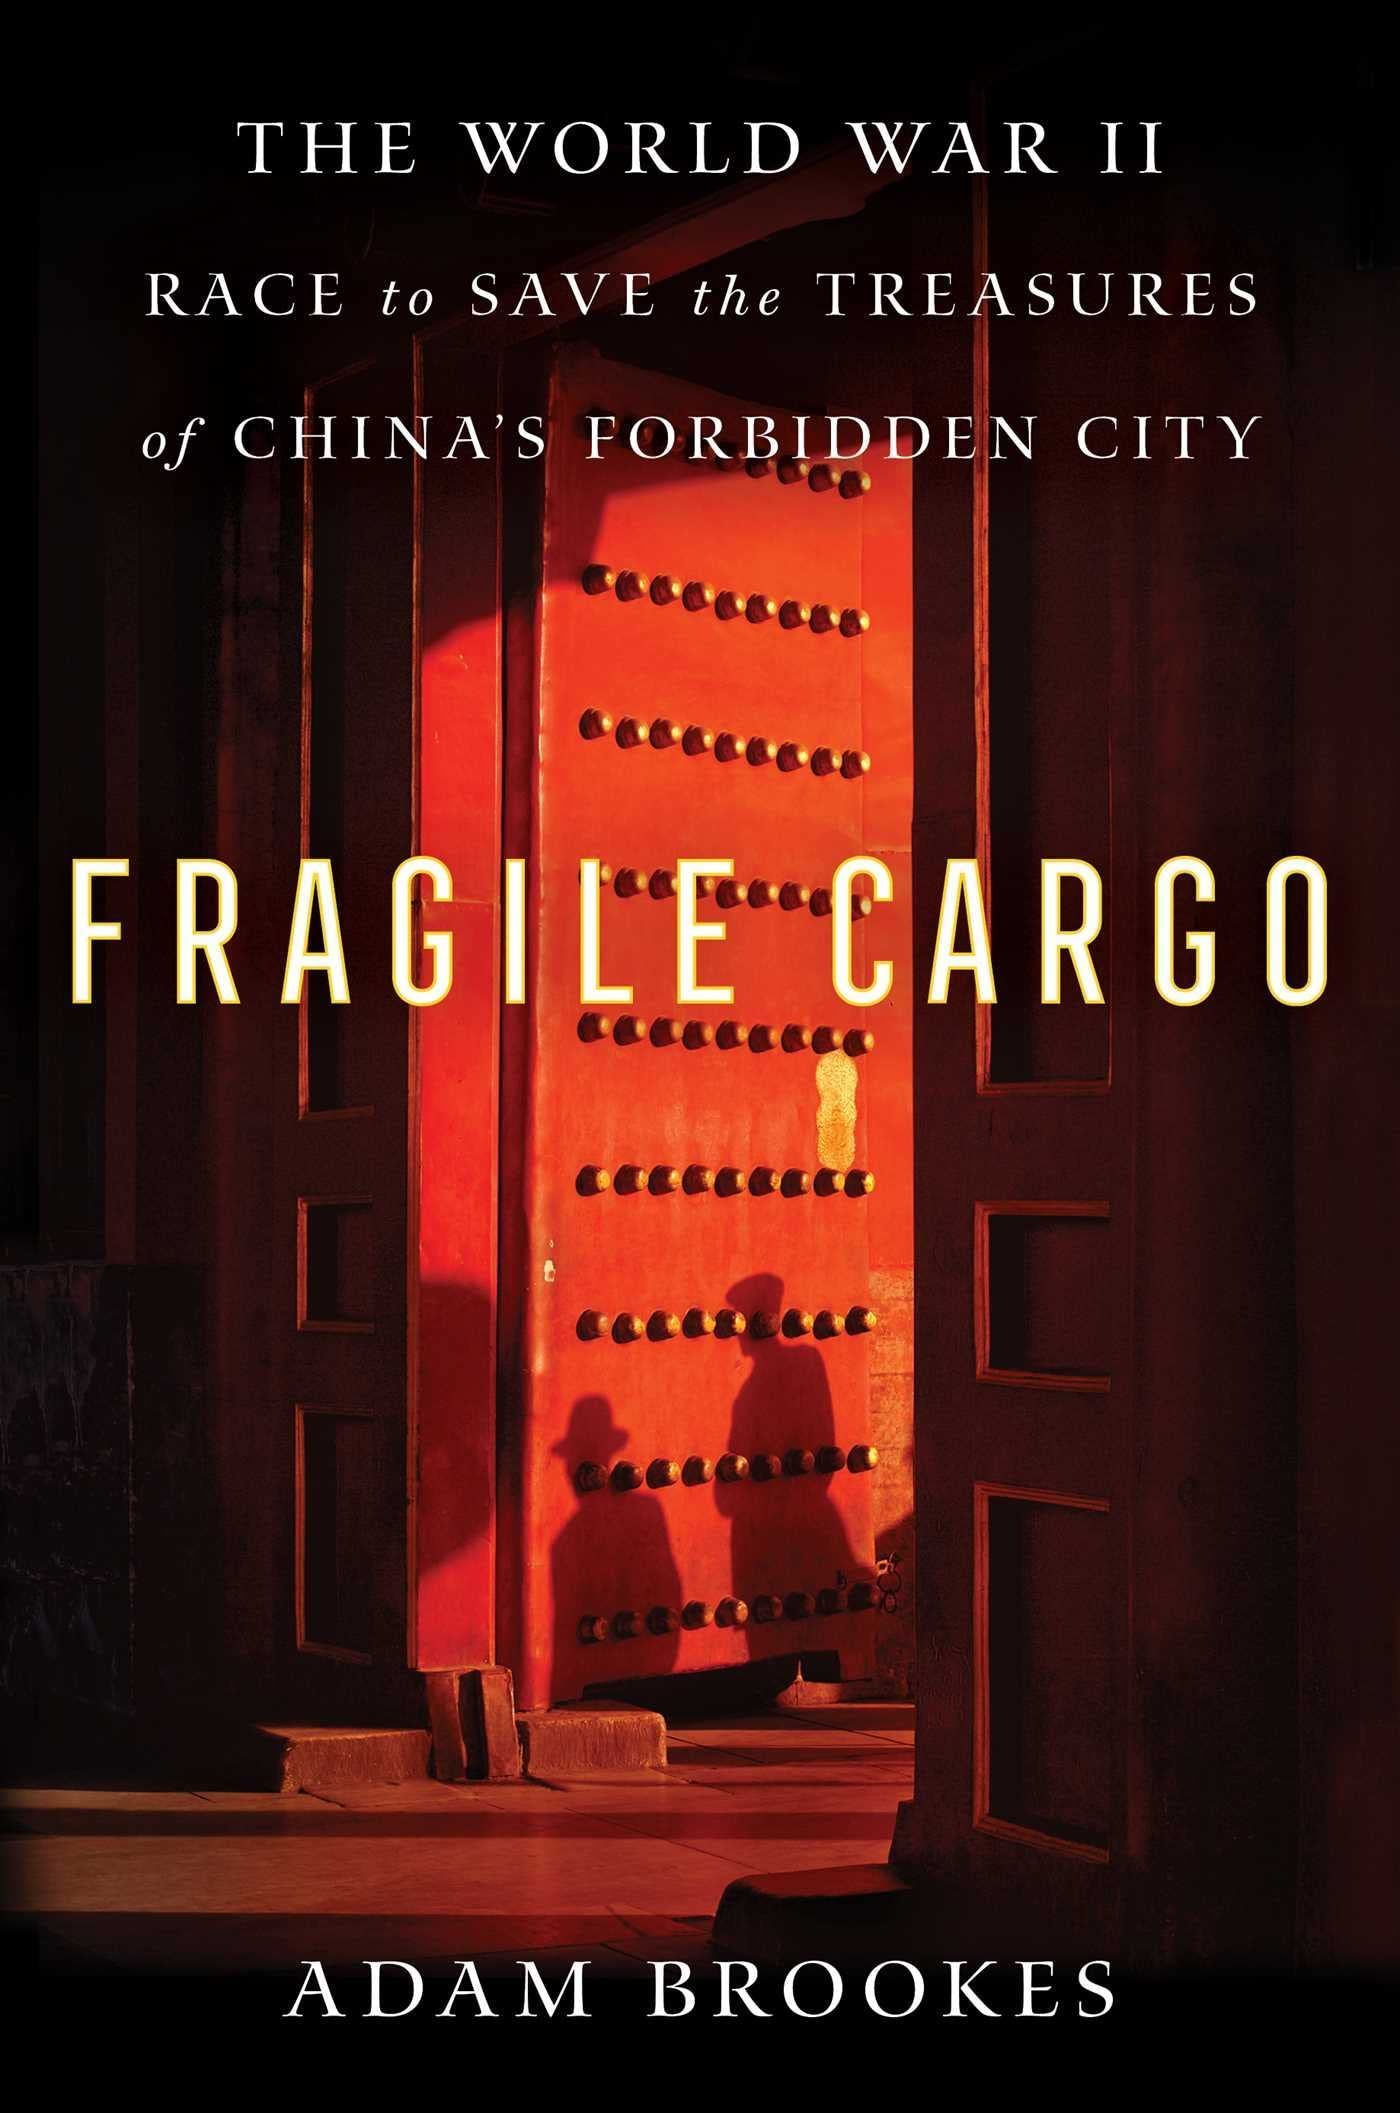 From Qing Imperial Collection to Chinese National Treasures:  On Adam Brookes’s “Fragile Cargo”